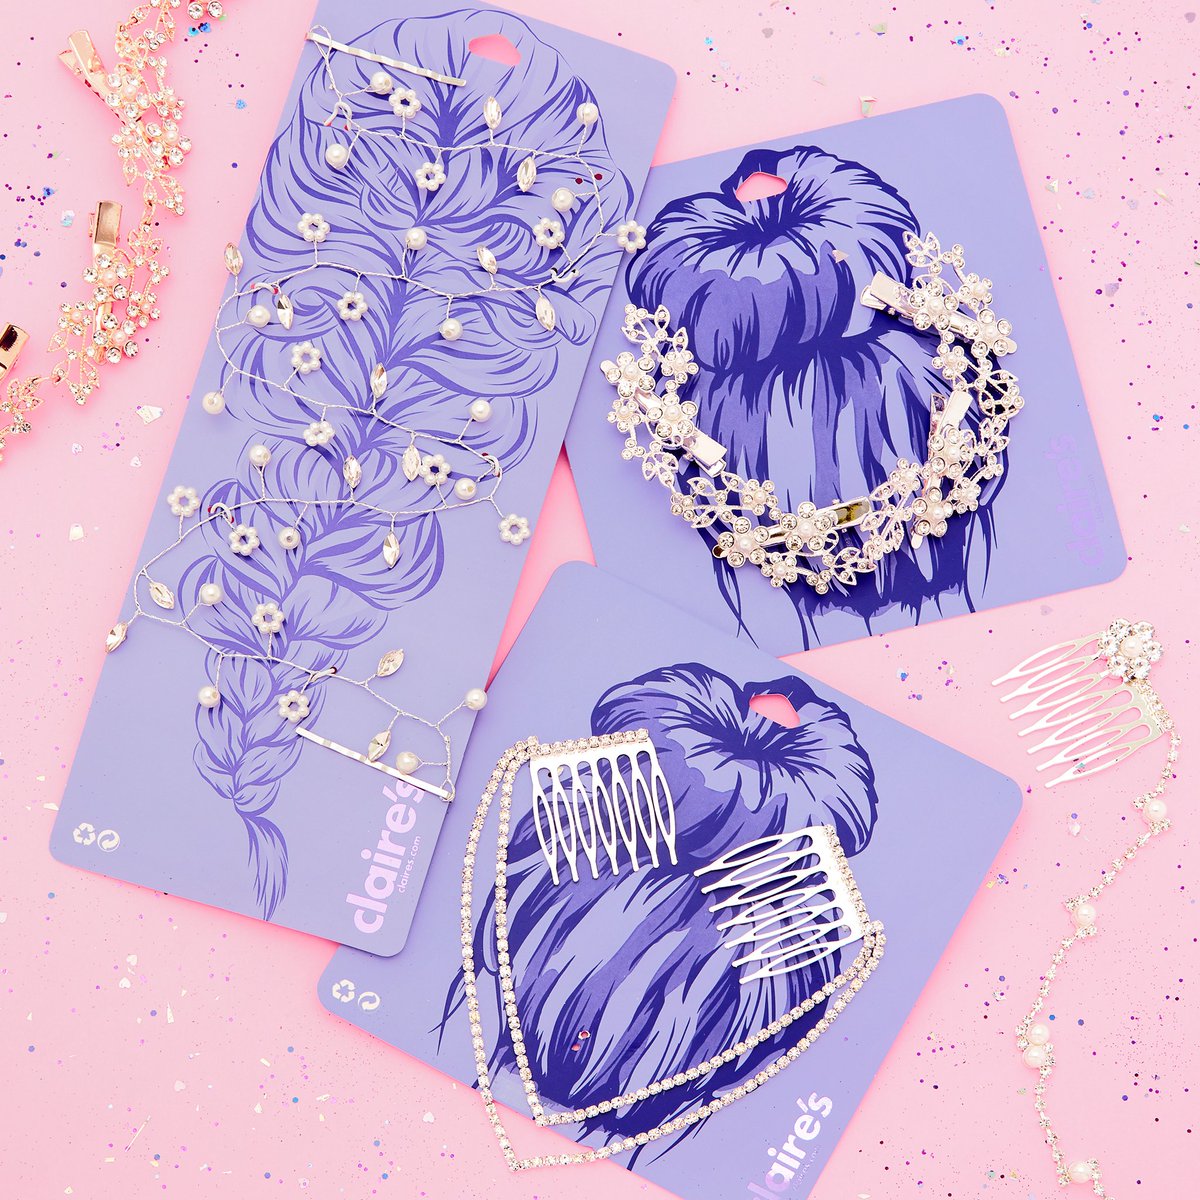 Claire's on X: "Create a gorgeous hairstyle from prom with our range of hair accessories like vines and swags! 💁🏼 Shop in and online! #ItsAtClaires https://t.co/bvR3VOOIgn" / X